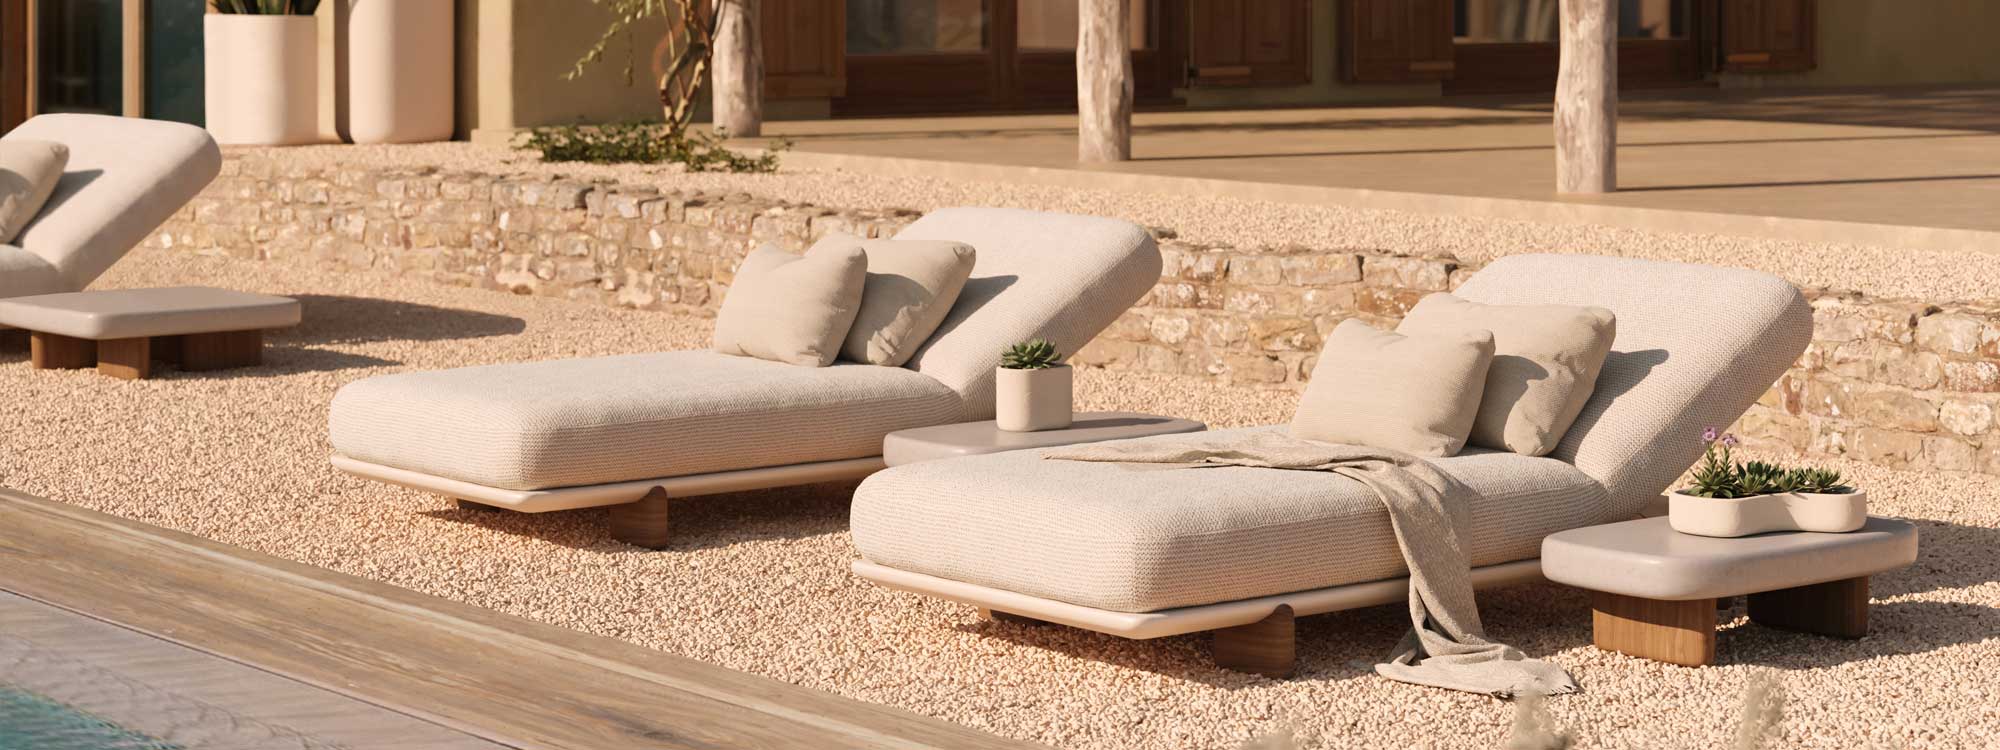 Image of row of Milos sun loungers by Vondom on gravel poolside